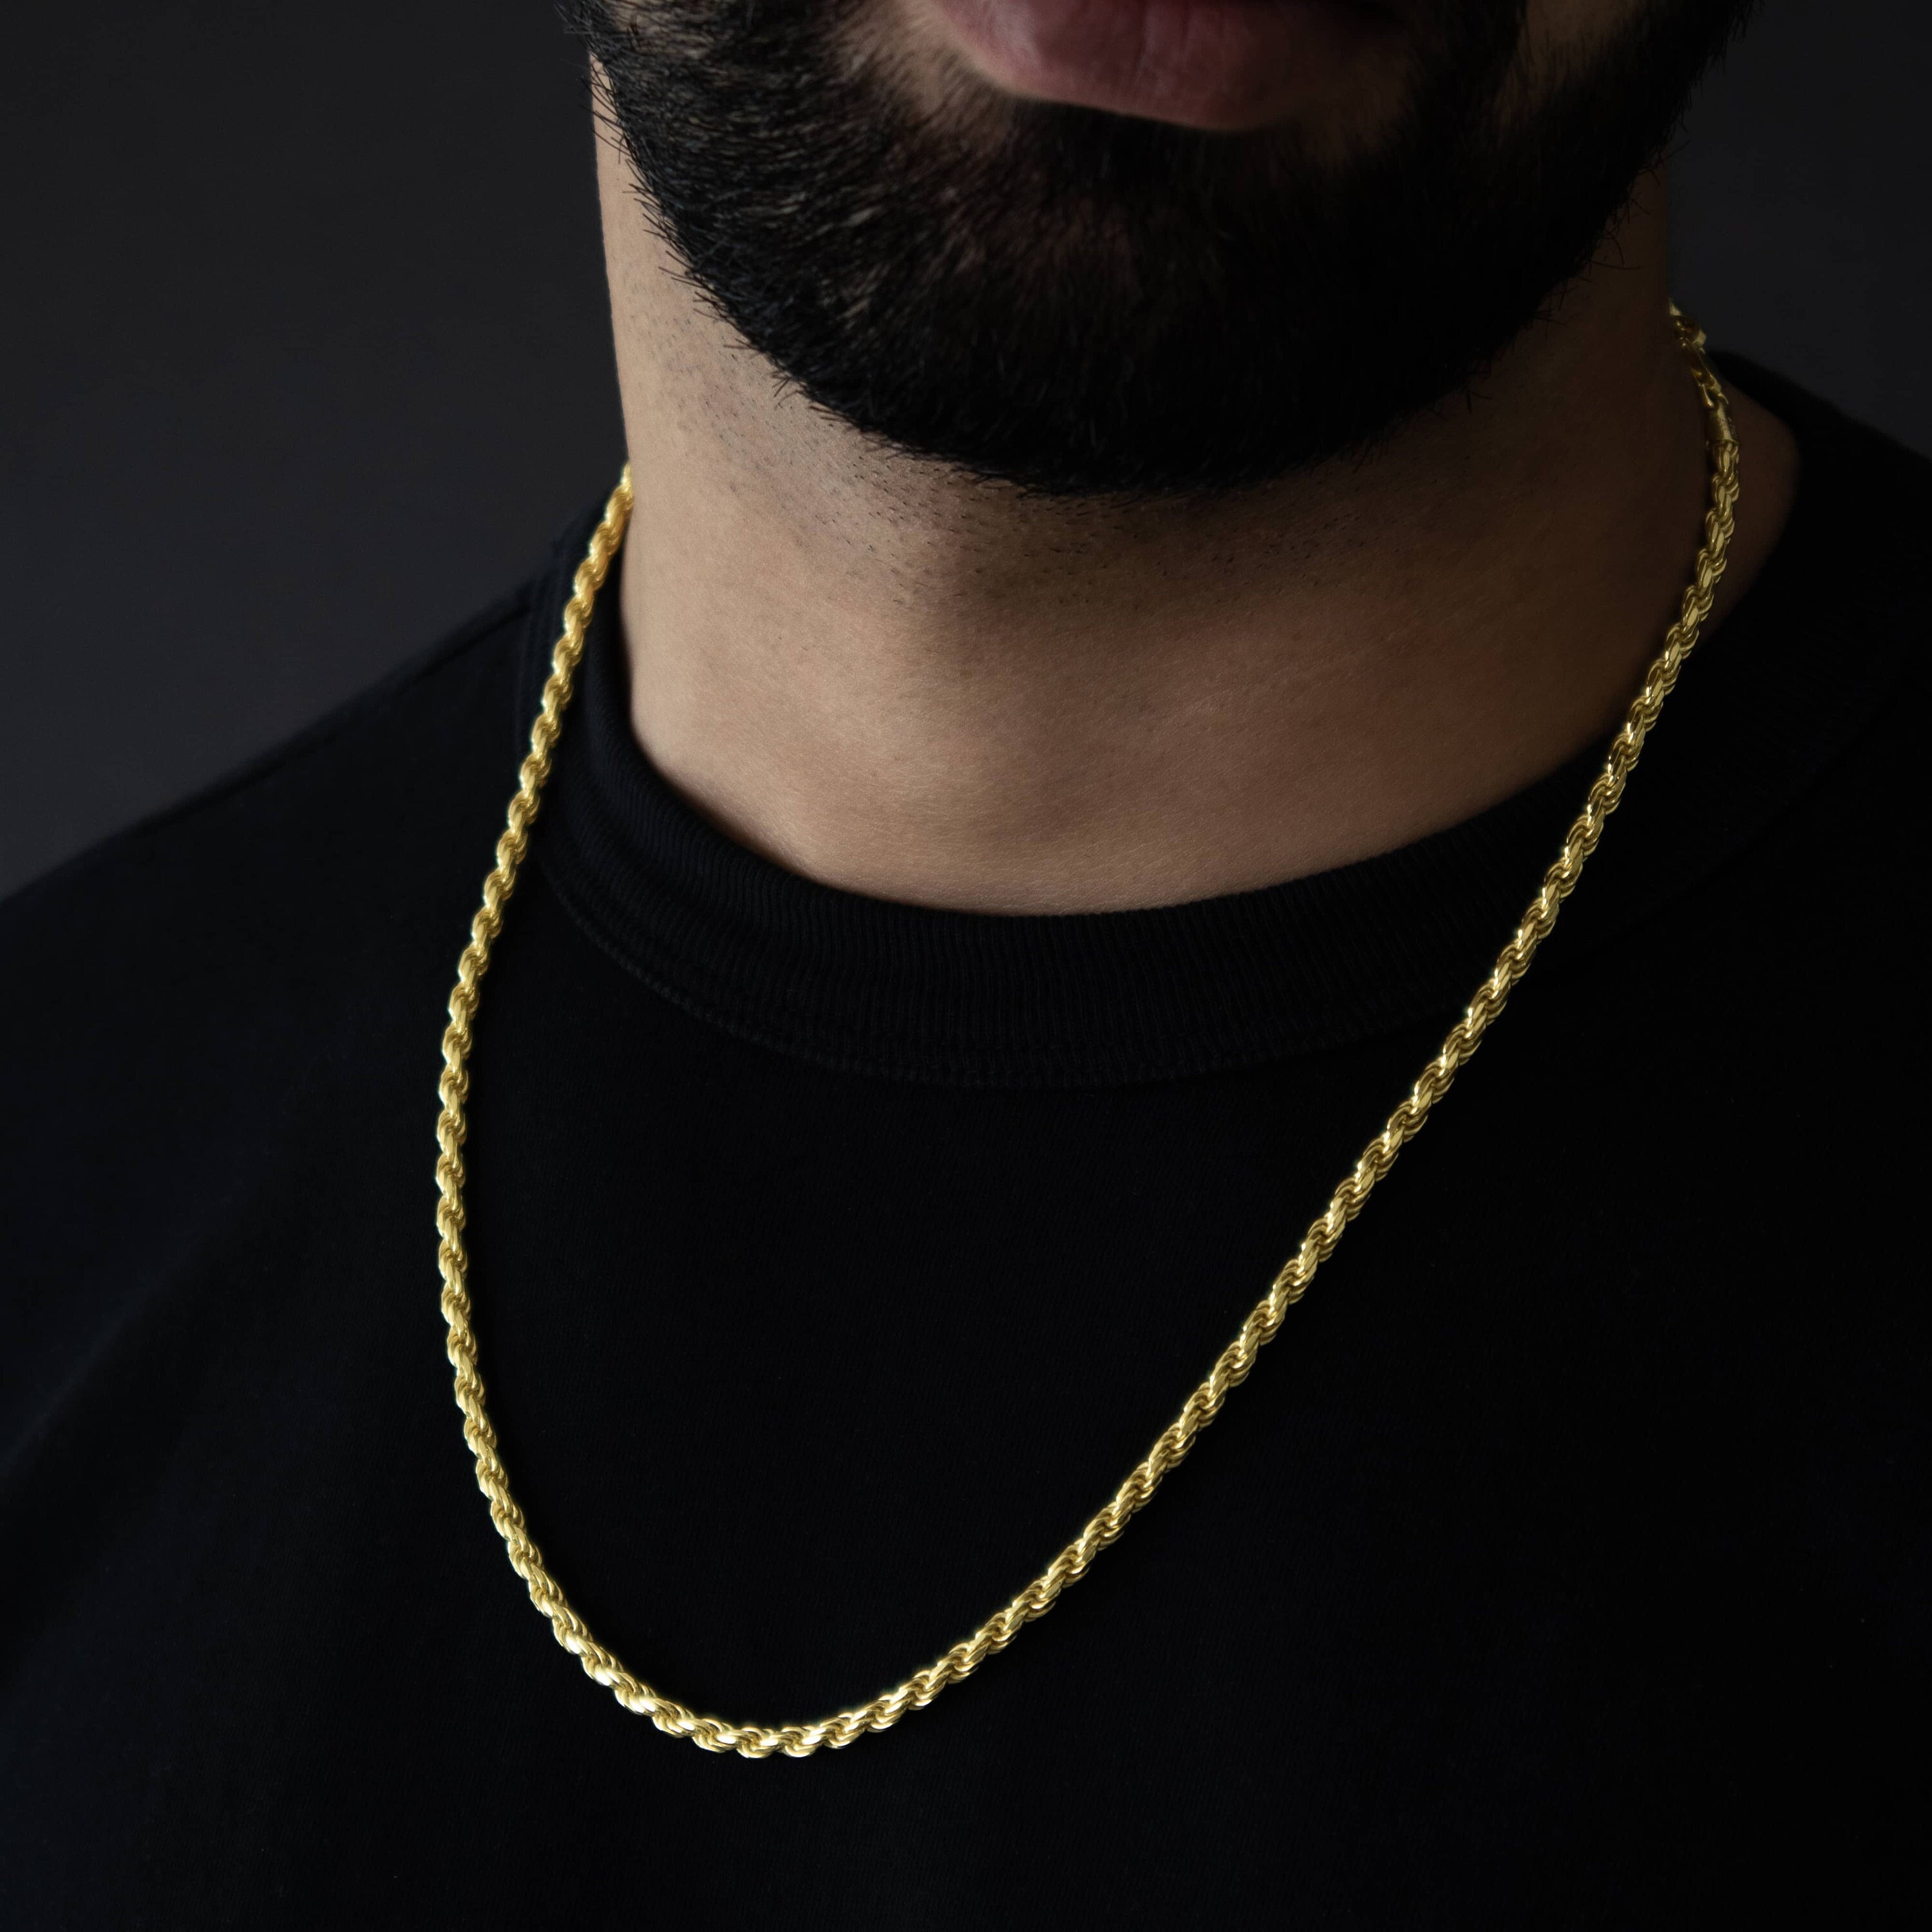 3.5mm 14k Gold Rope Chain, Men's Silver Chain, Gold Rope Necklace, 925 Silver Chain, Gift for Him, Silver Rope Necklace